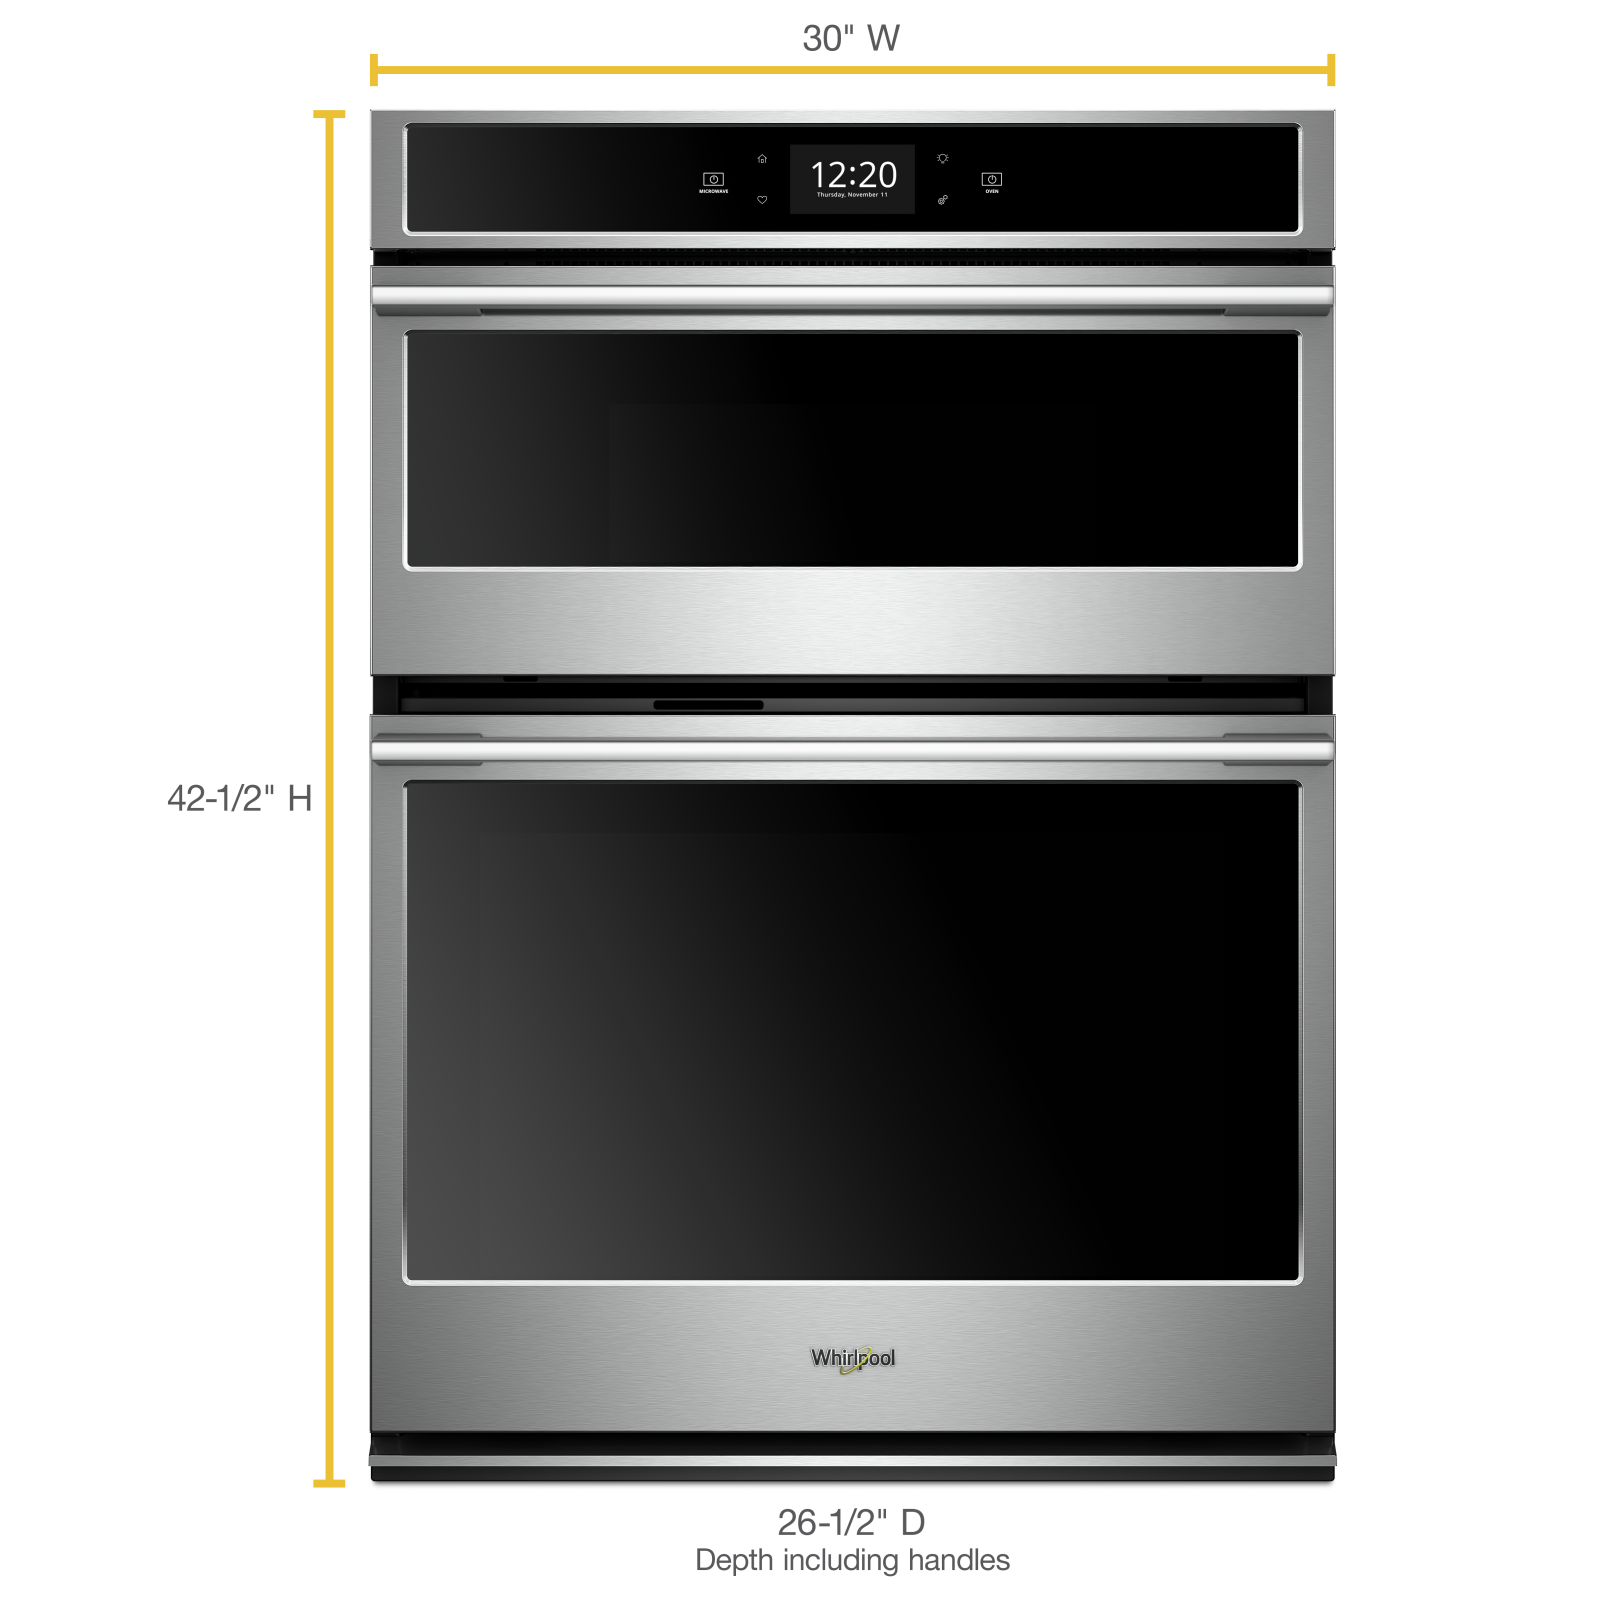 Whirlpool - 6.4 cu. ft Combination Wall Oven in Stainless - WOCA7EC0HZ